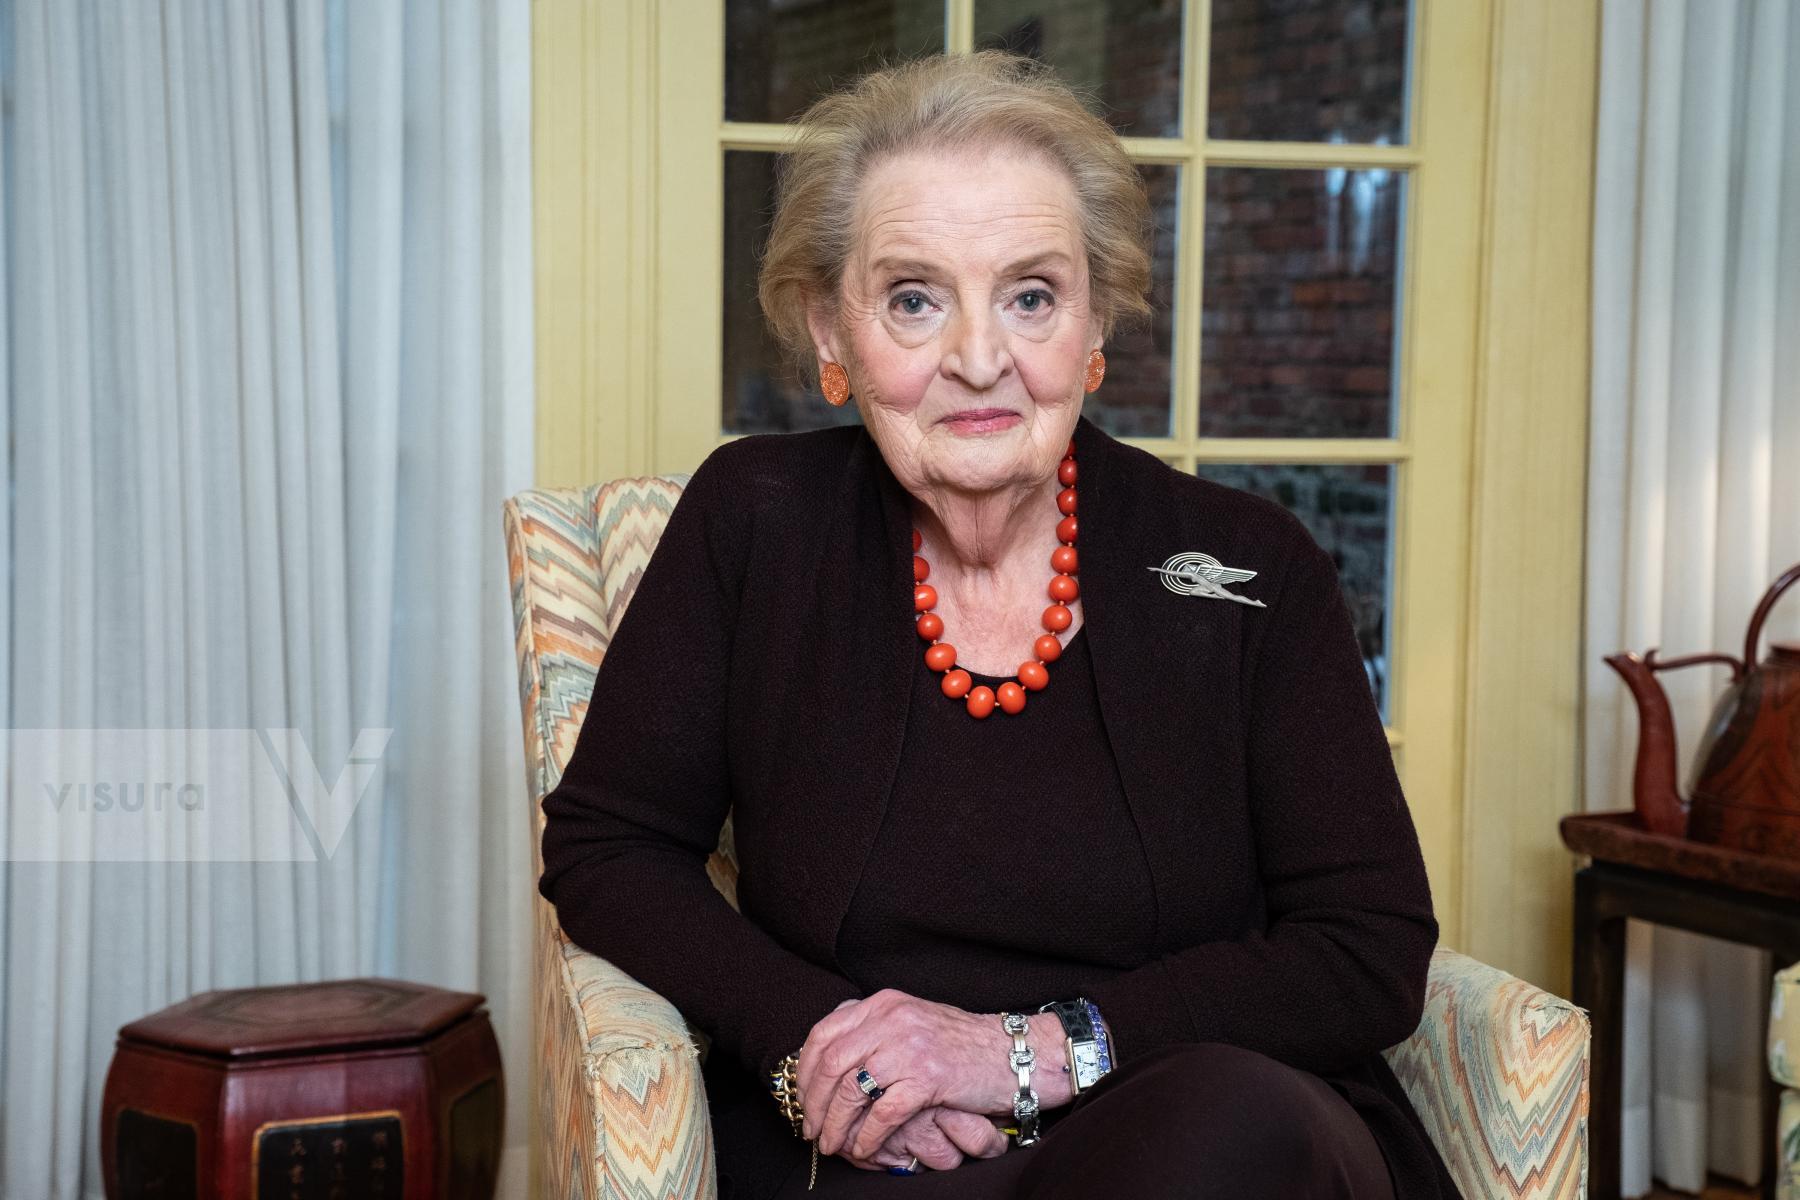 Purchase Portrait of Madeleine Albright for the Financial Times by Carla Cioffi